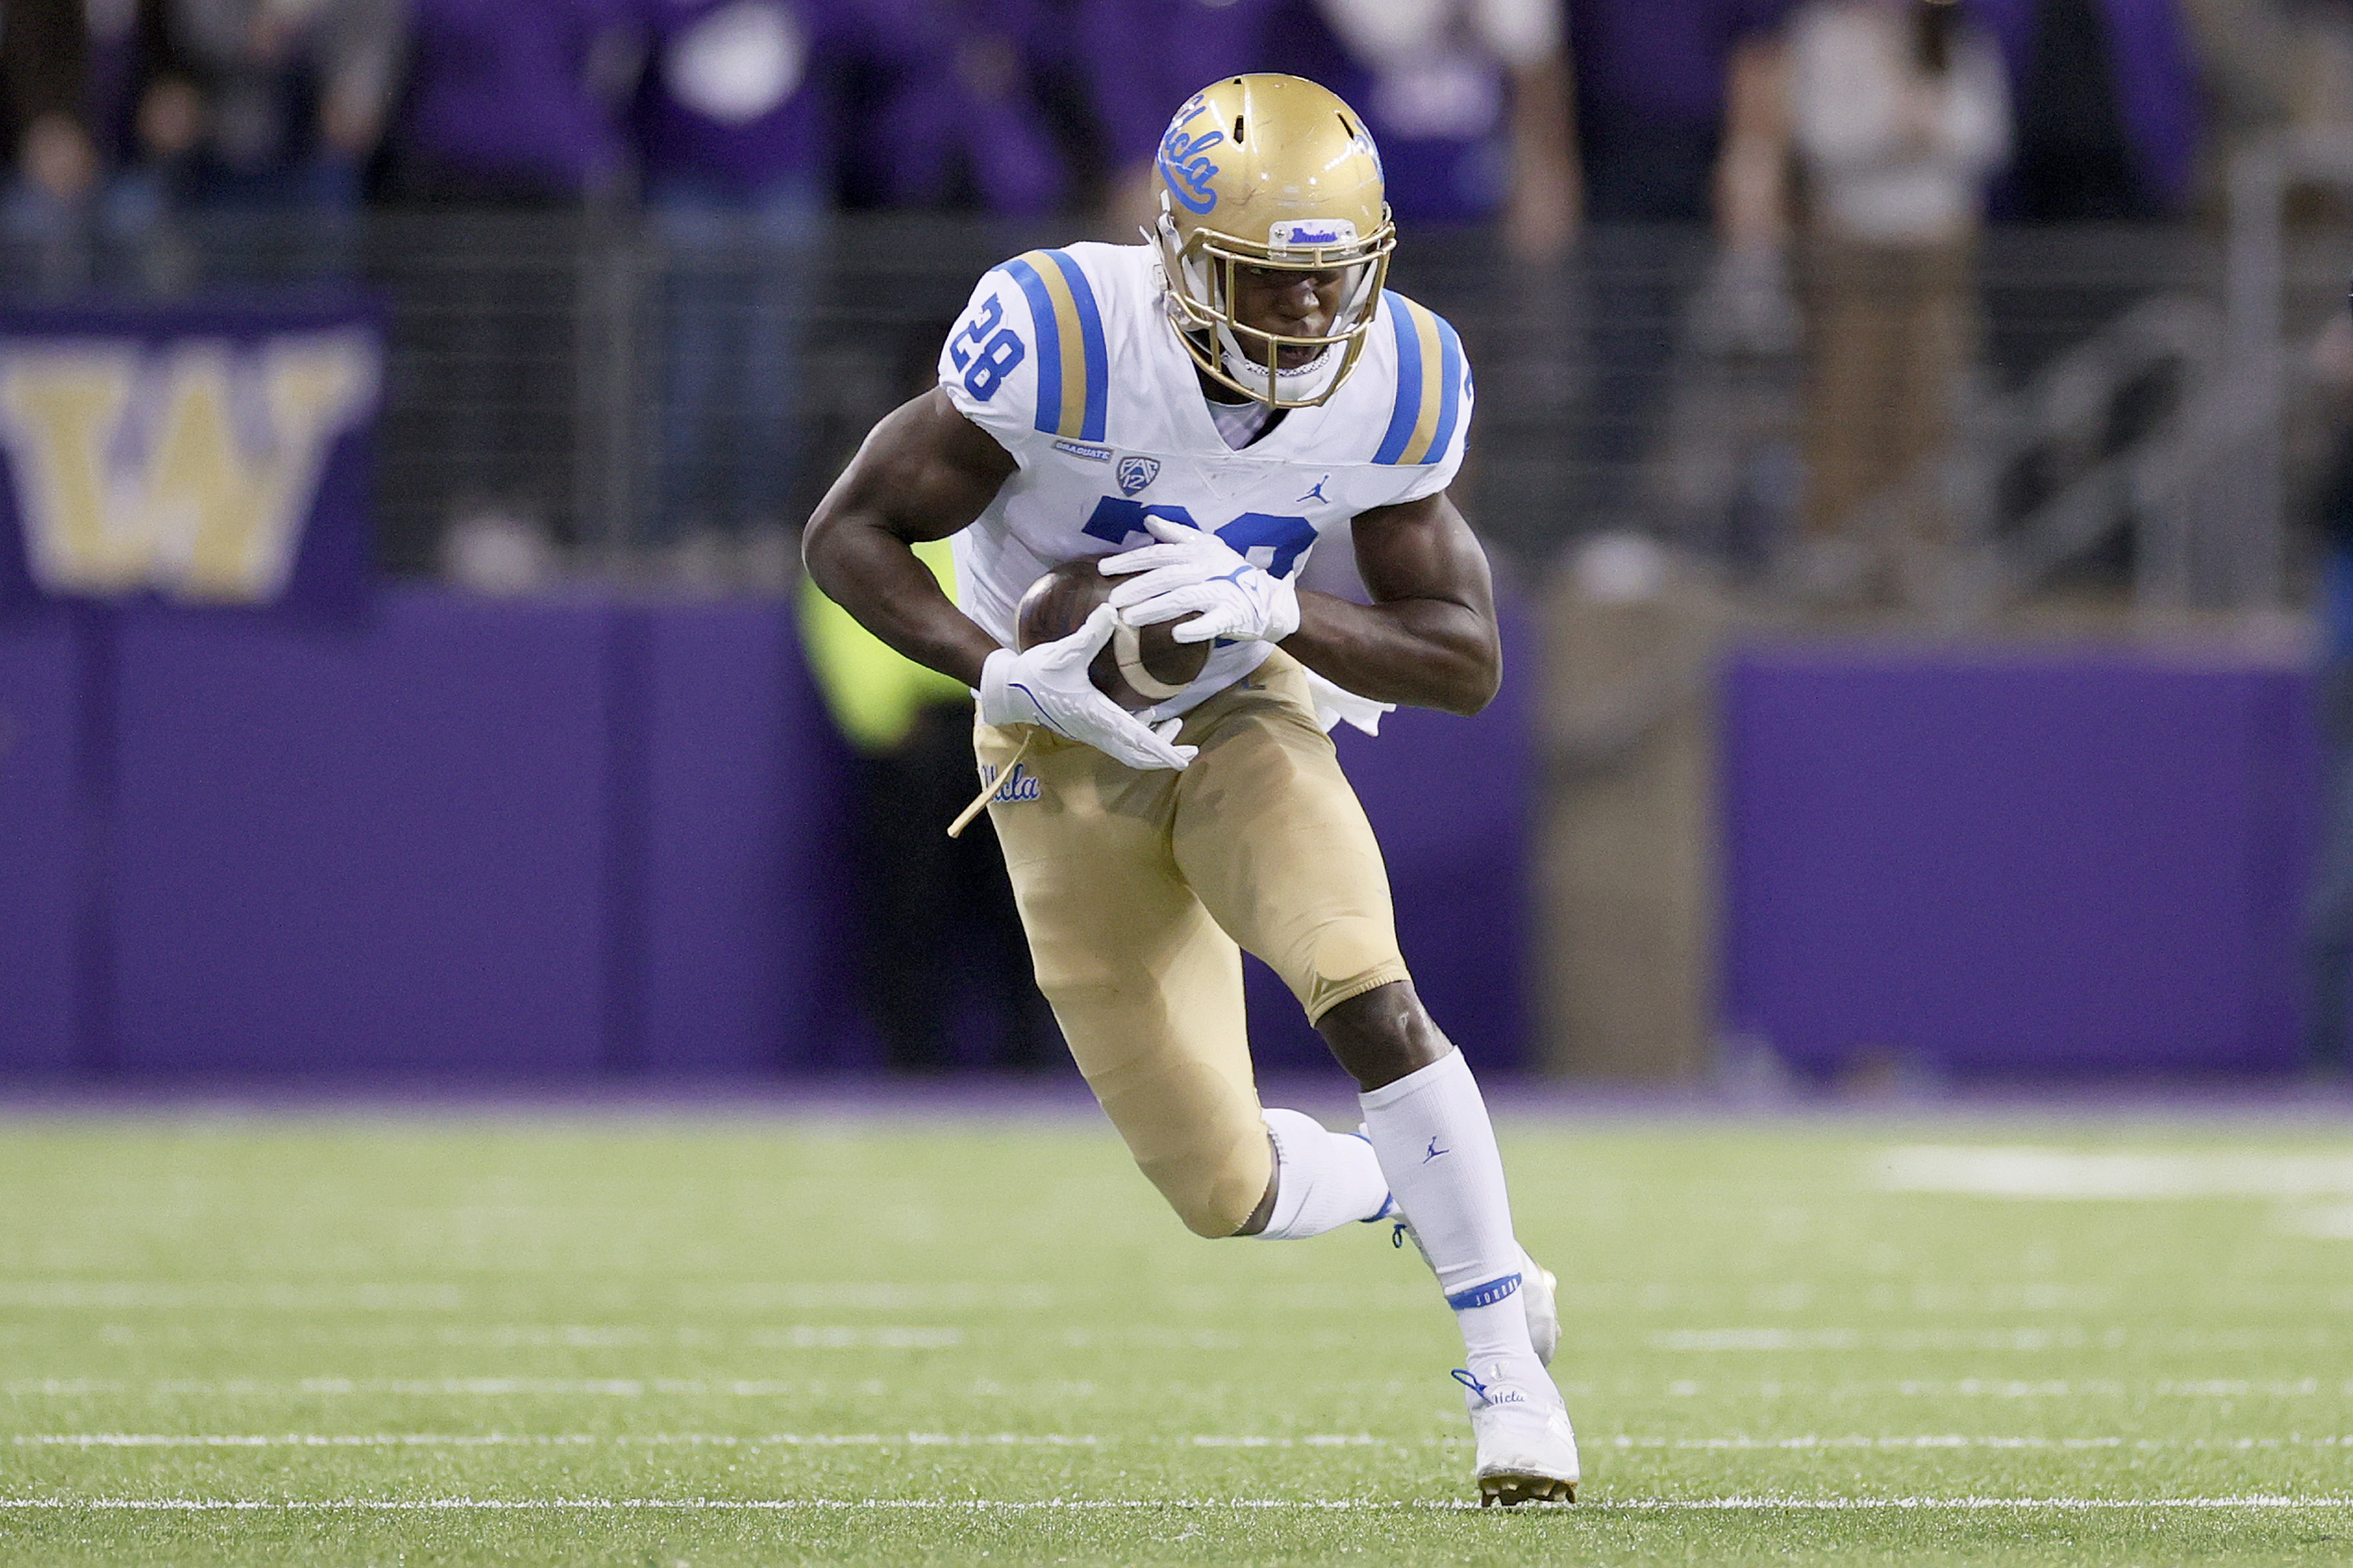 Oregon vs UCLA Point Spread, Over/Under, Moneyline and Betting Trends for College Football Week 8 Game